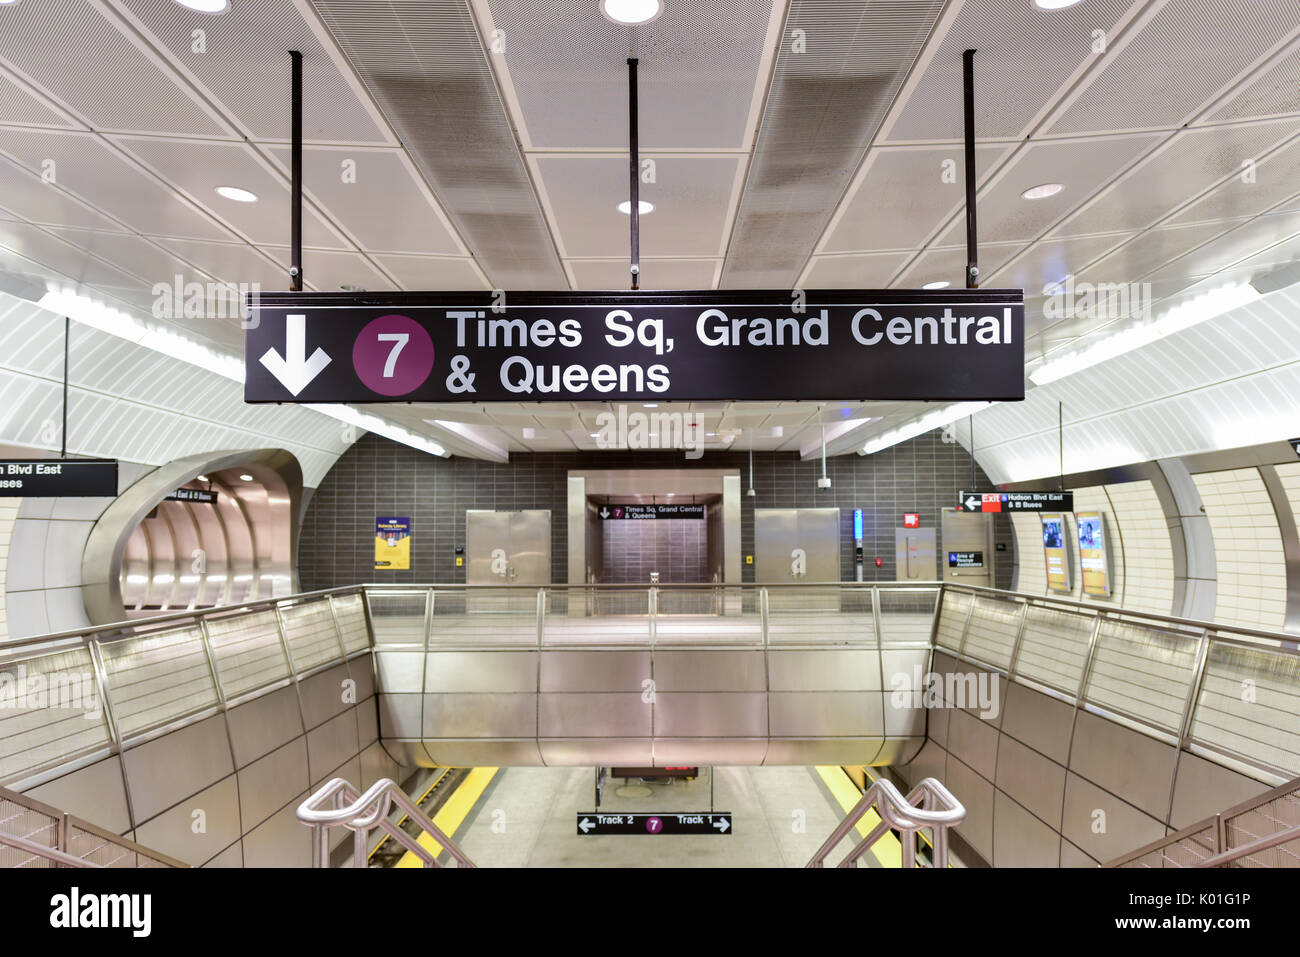 34th Street - Hudson Yards 7 train subway station which opened in September, 2015 in New York City. Stock Photo